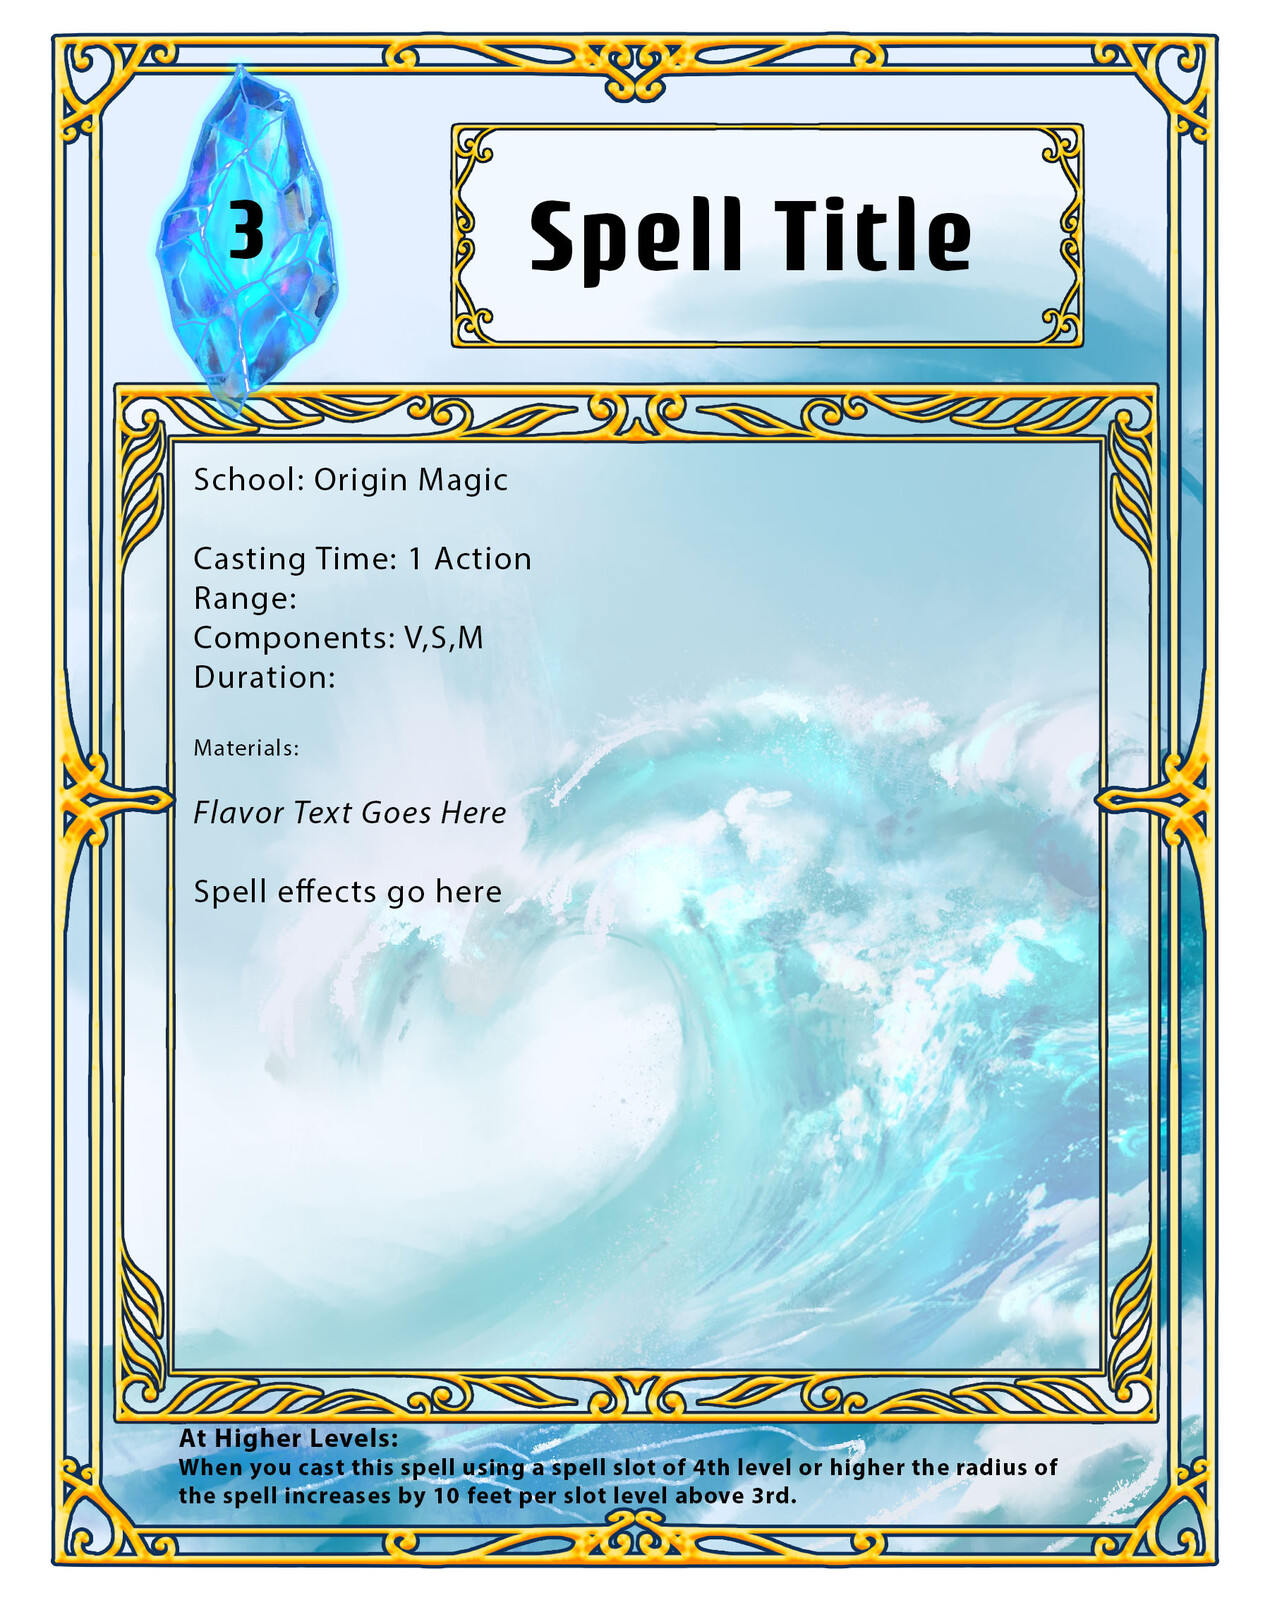 For water spells